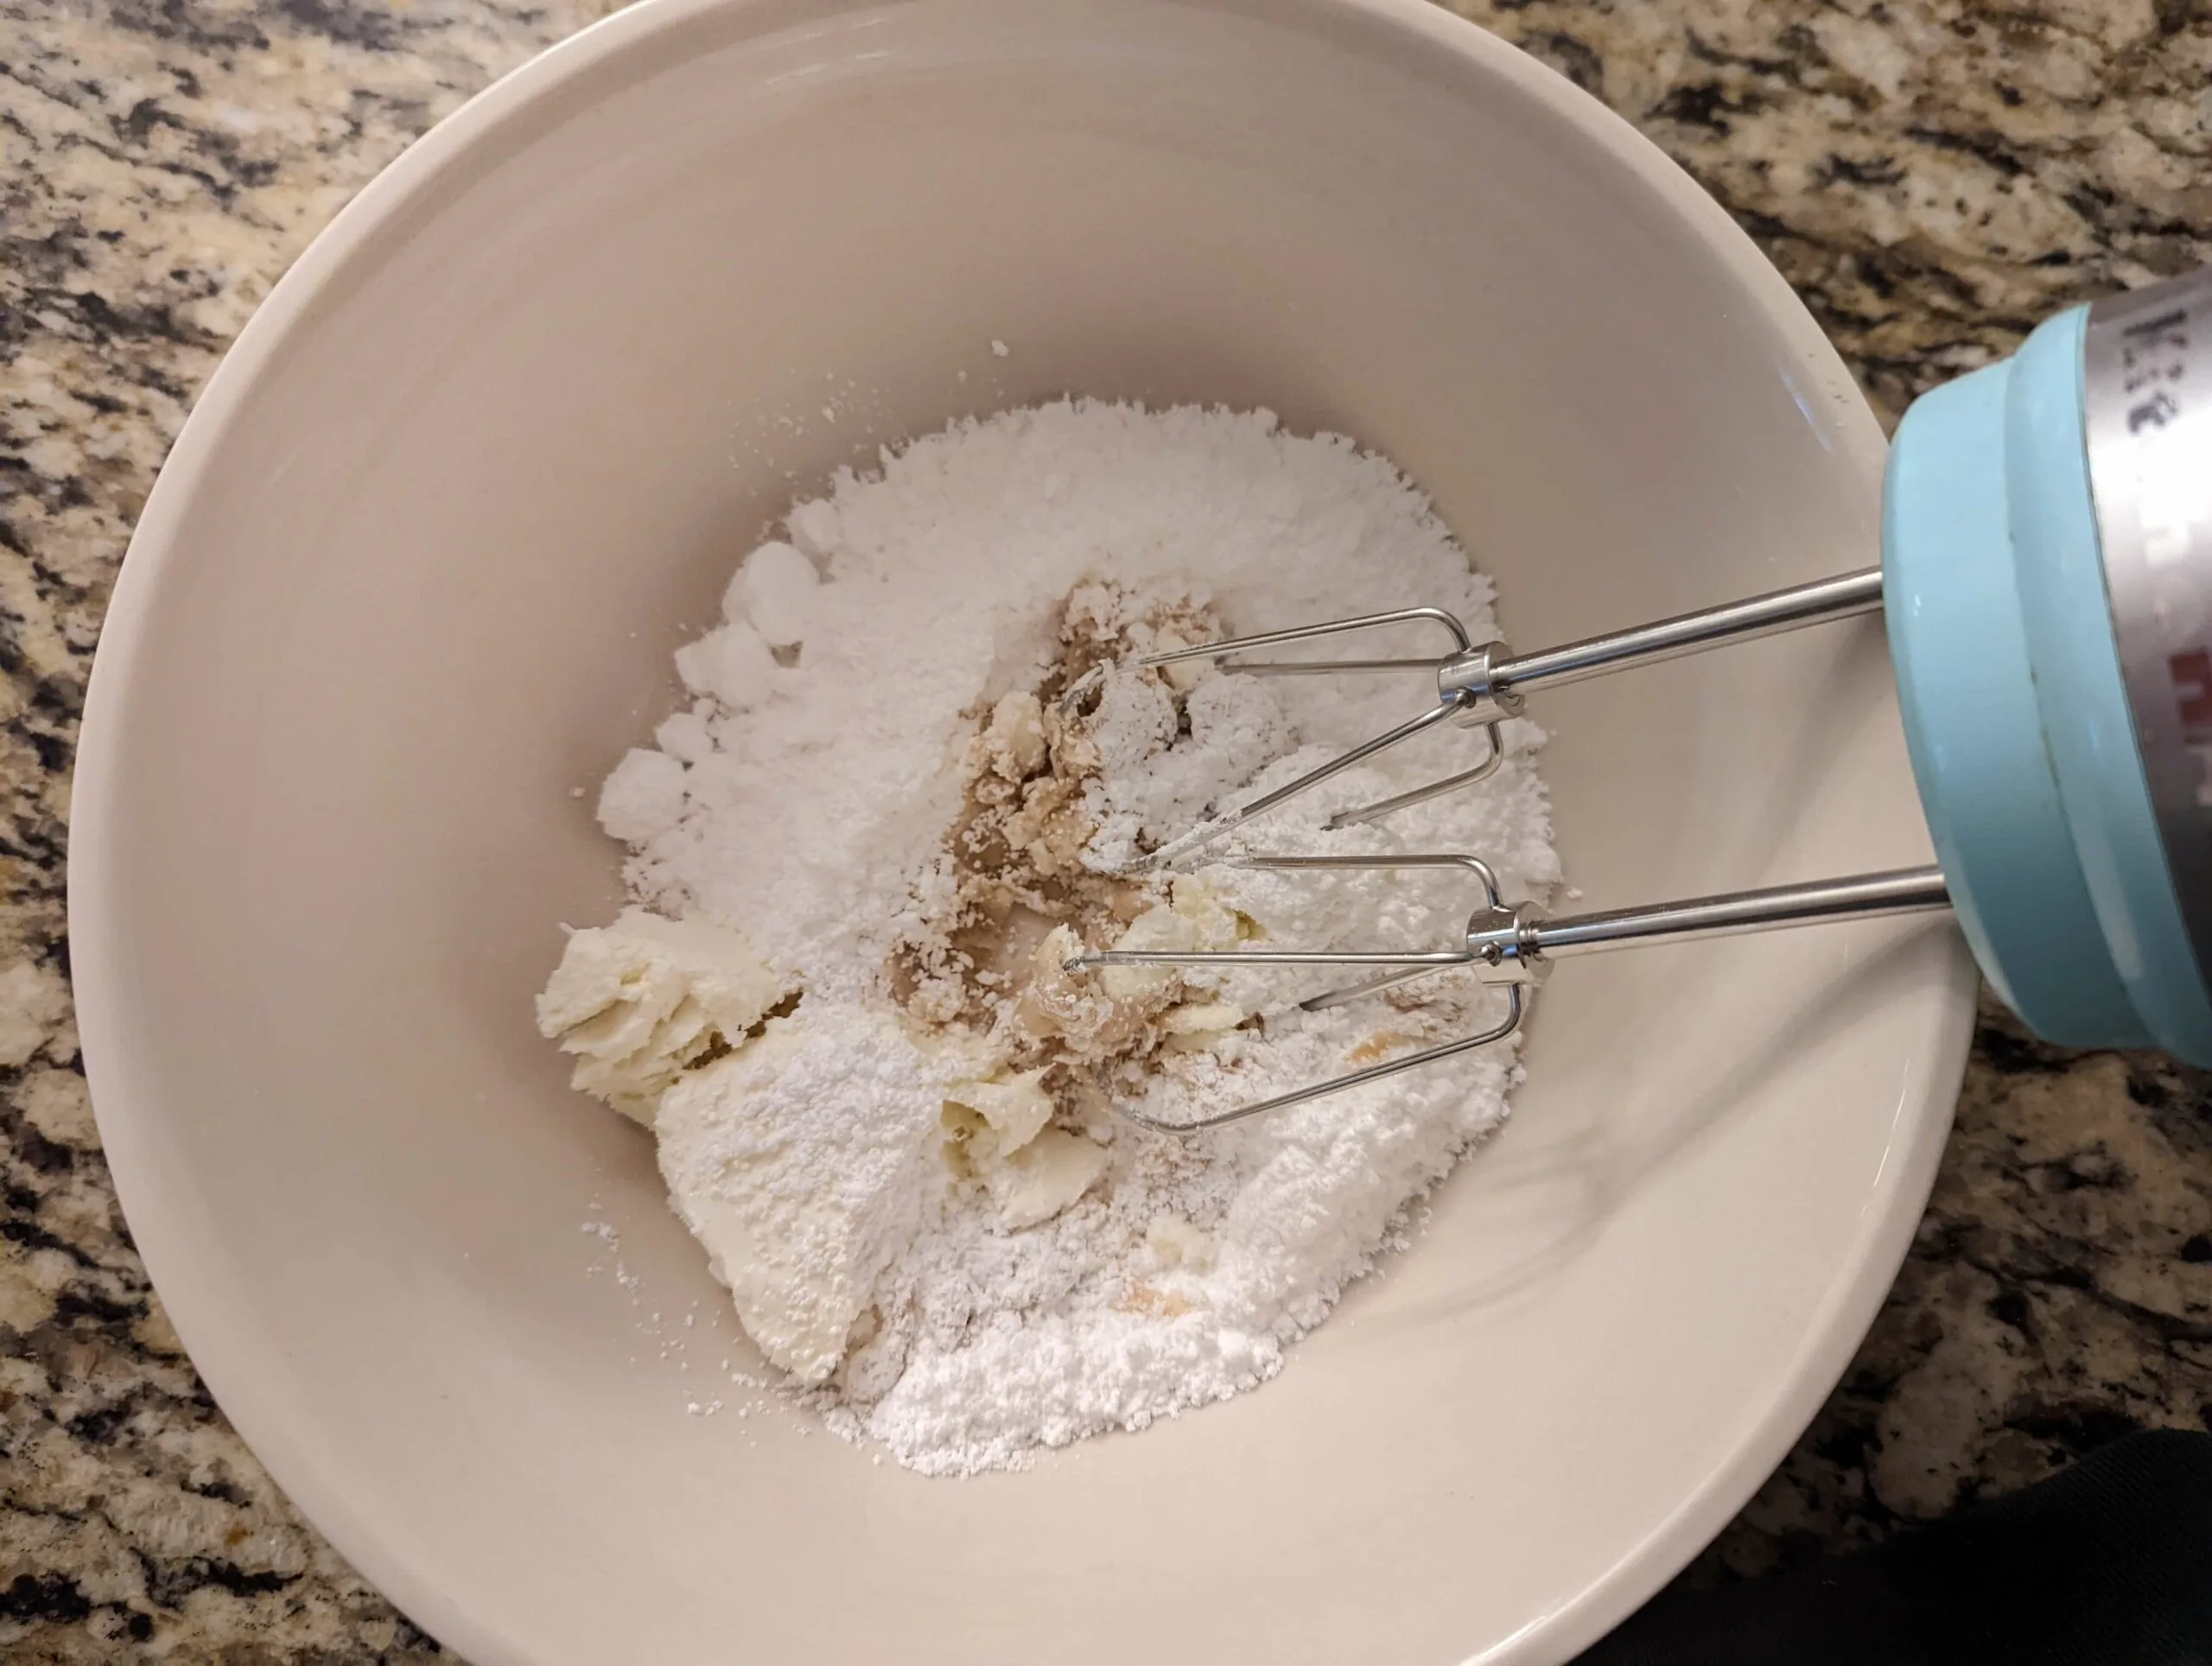 Combine the ingredients for cream cheese frosting in a mixing bowl.